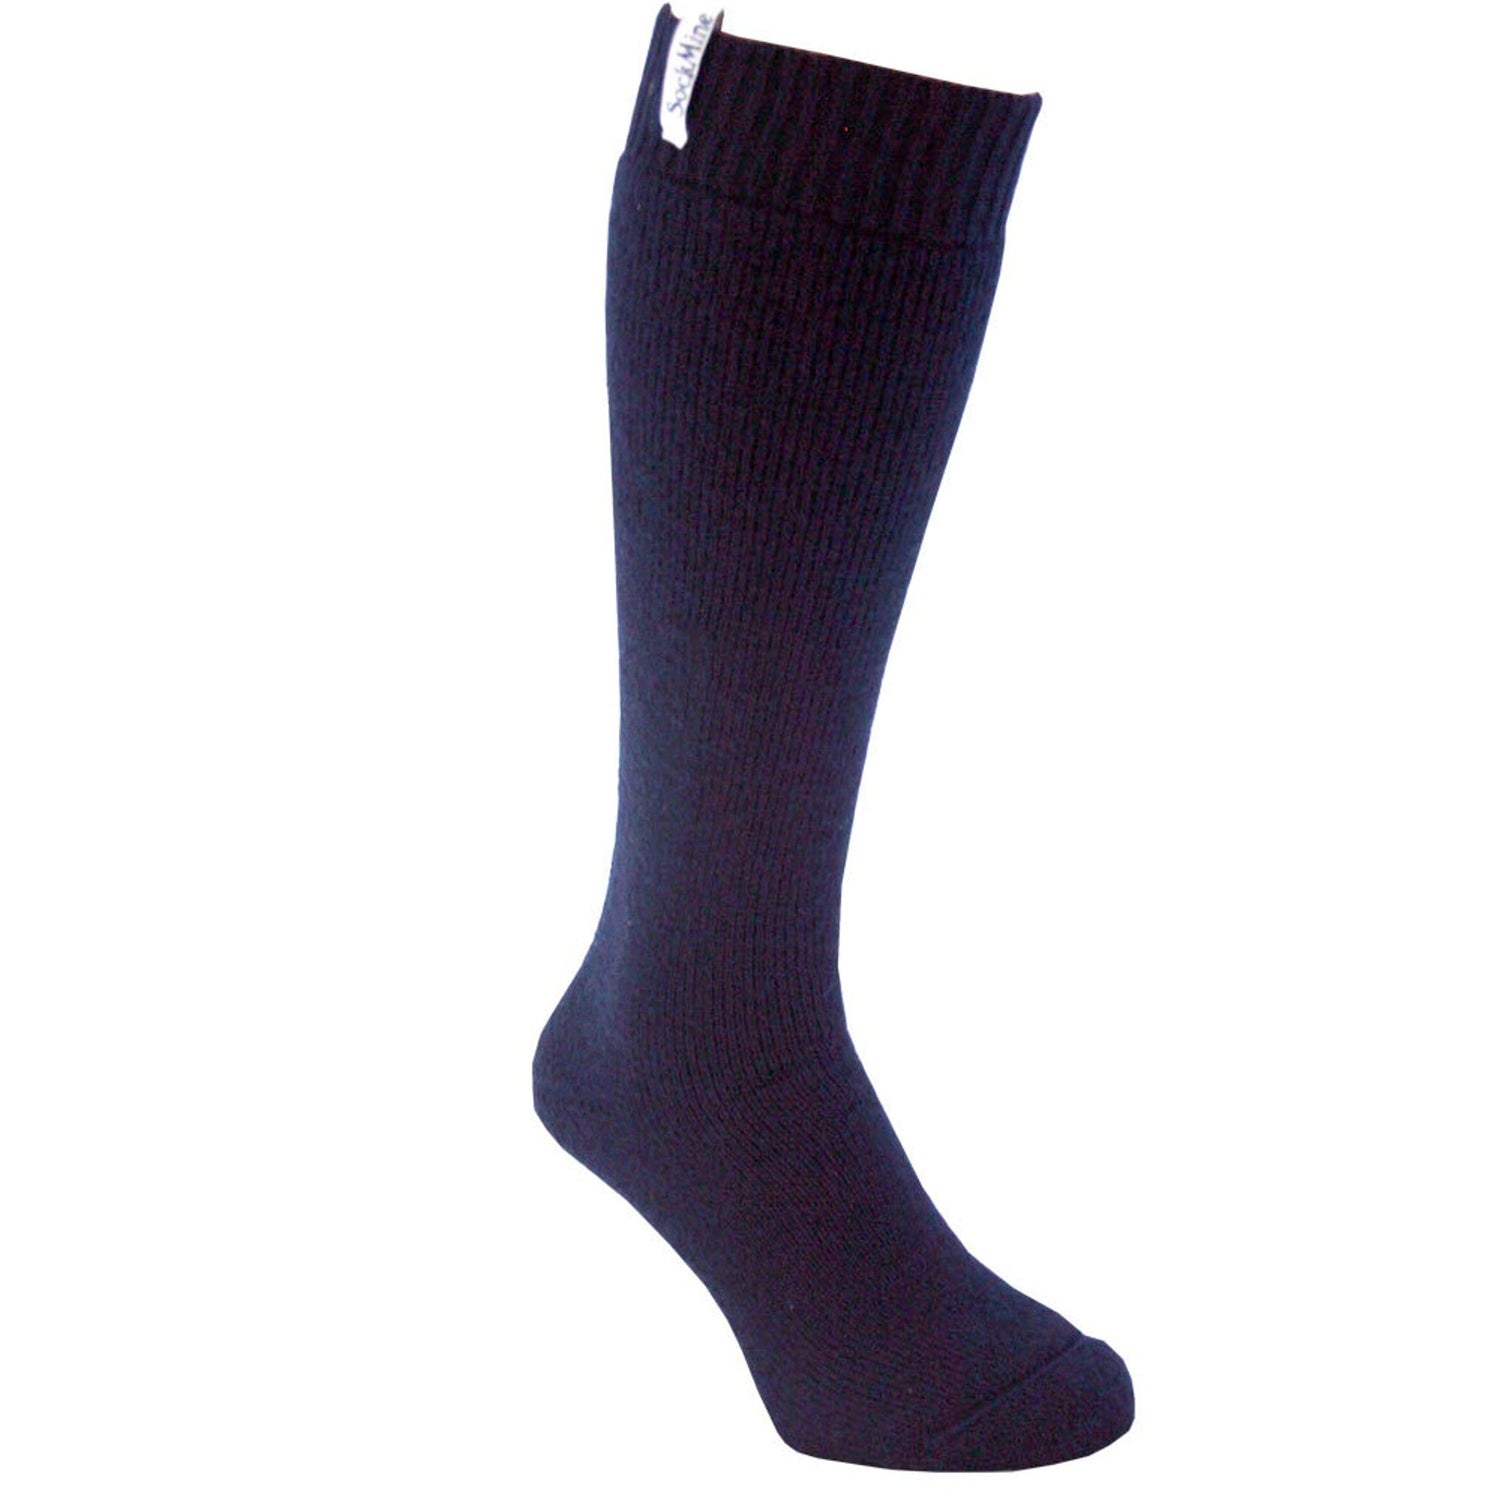 Adults Welly Sock - Navy